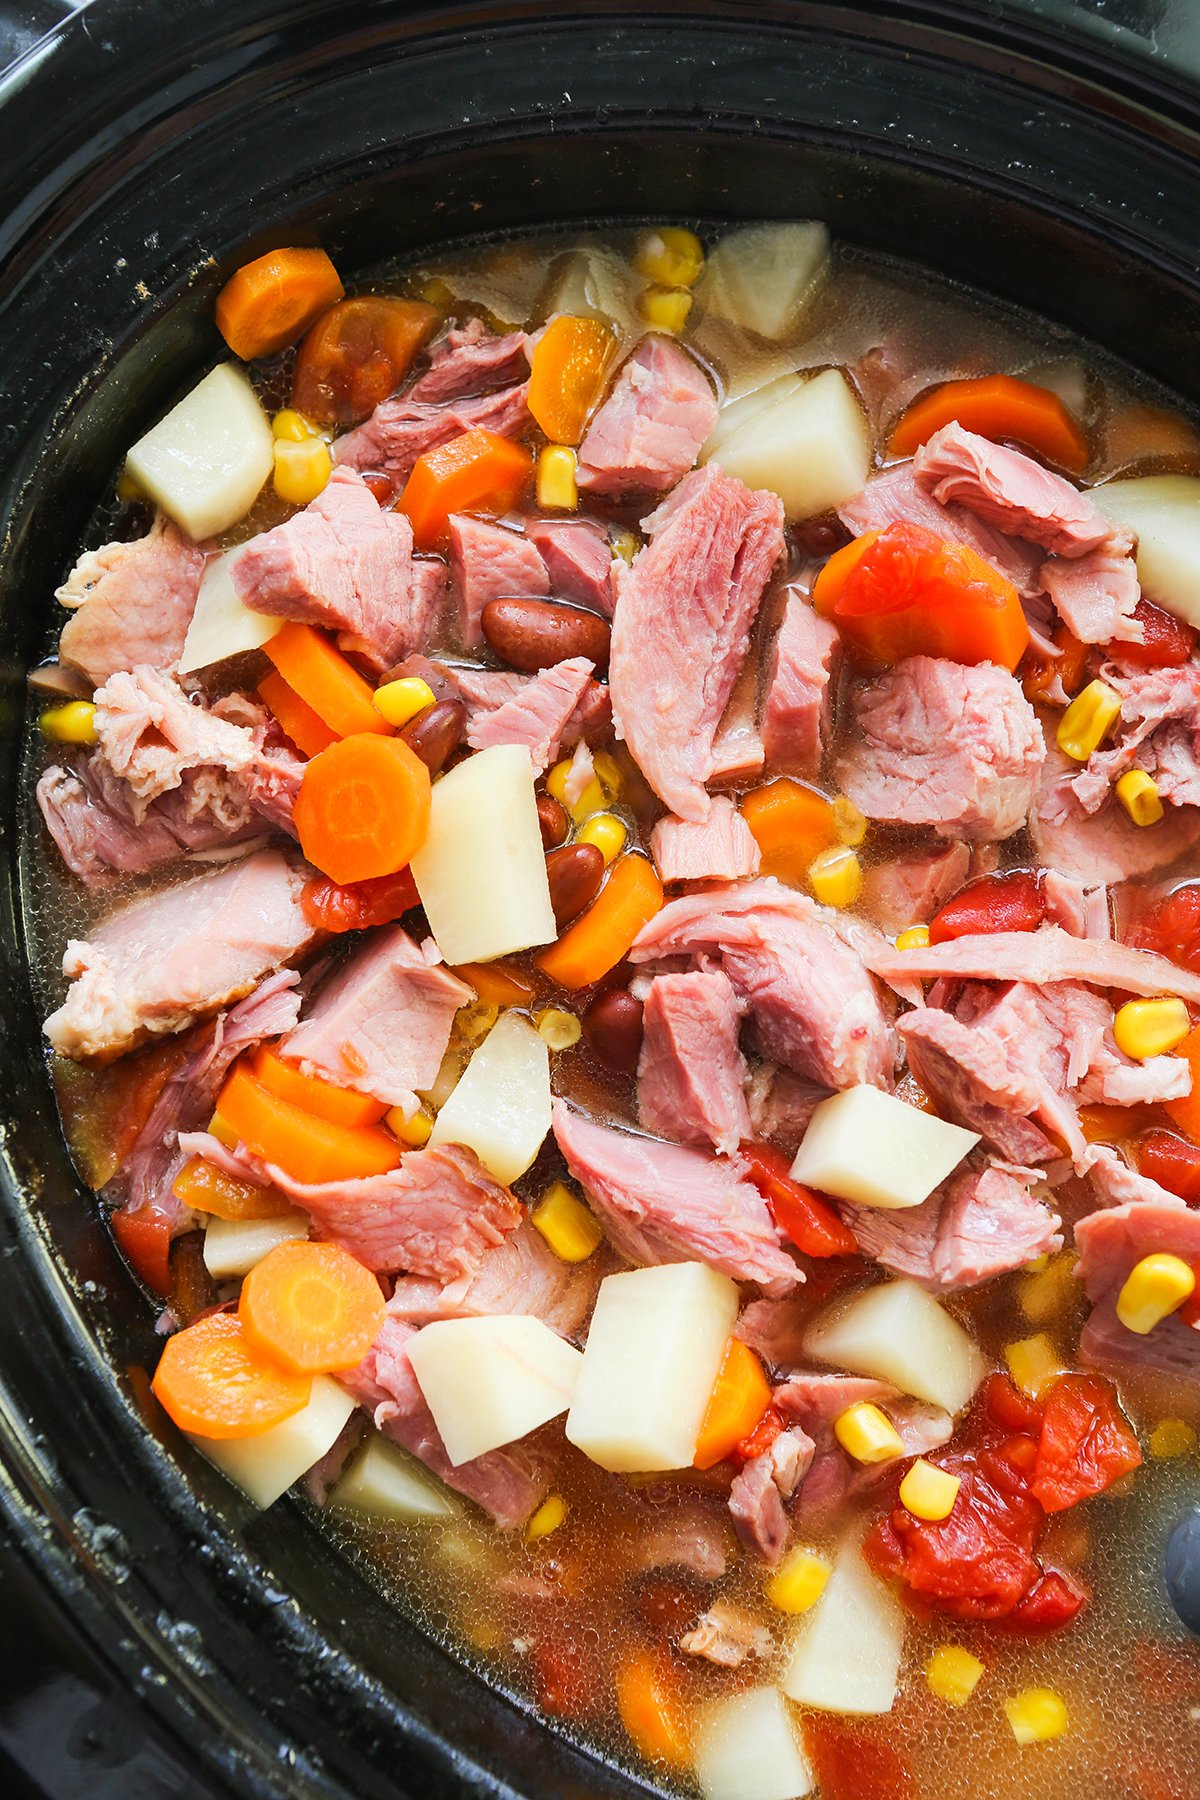 Ham pieces in a soup along with potato pieces and carrots, inside a slow cooker.